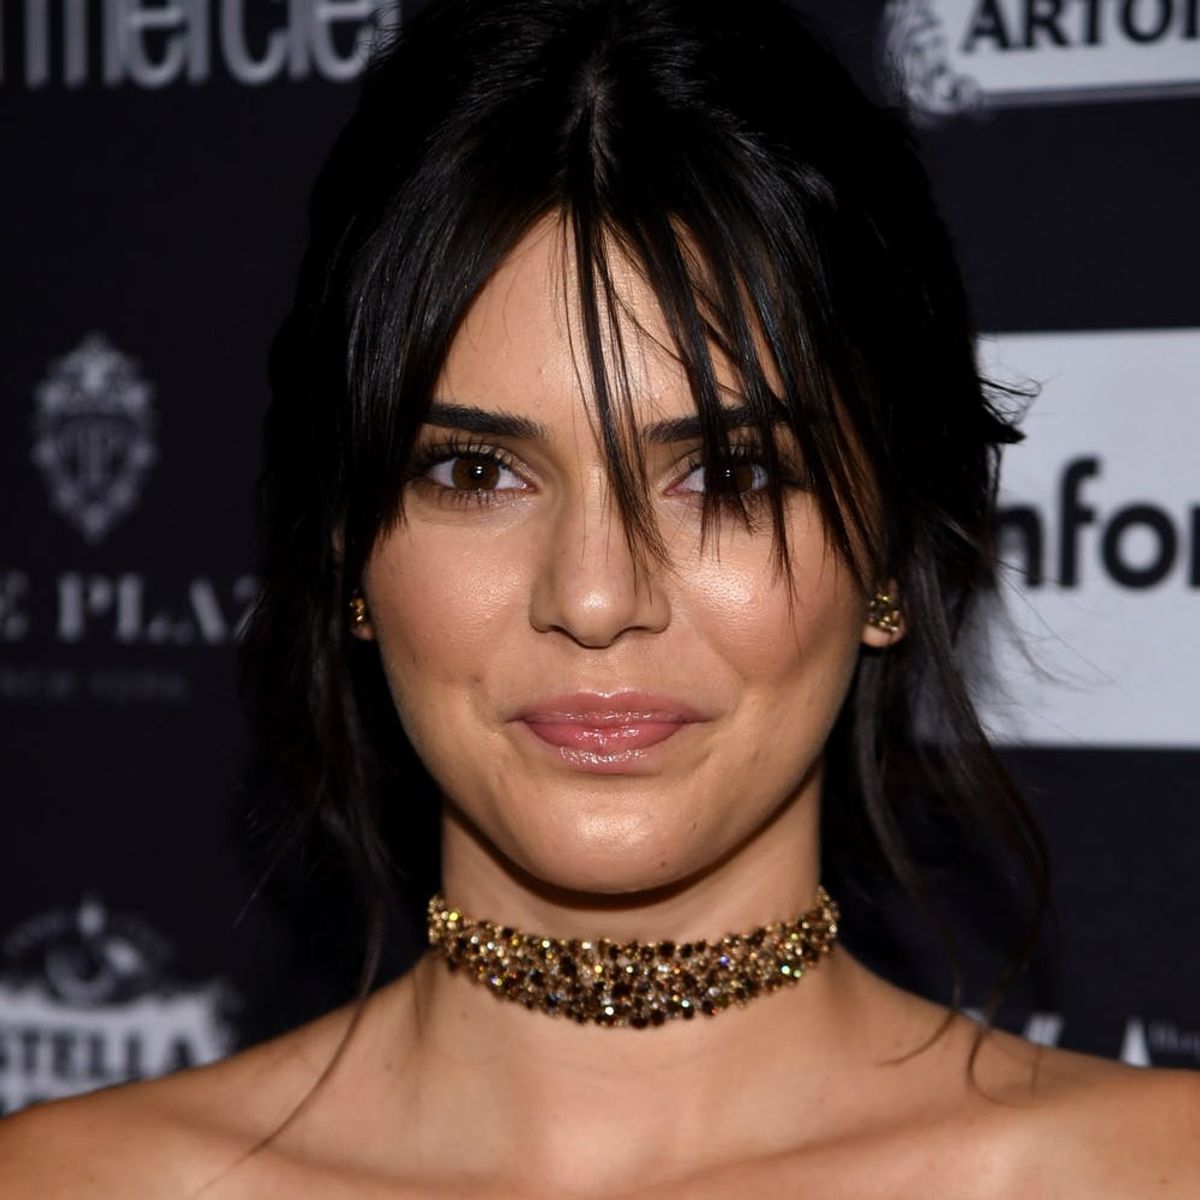 Kendall Jenner Got a New Tattoo in This Totally Unexpected Spot